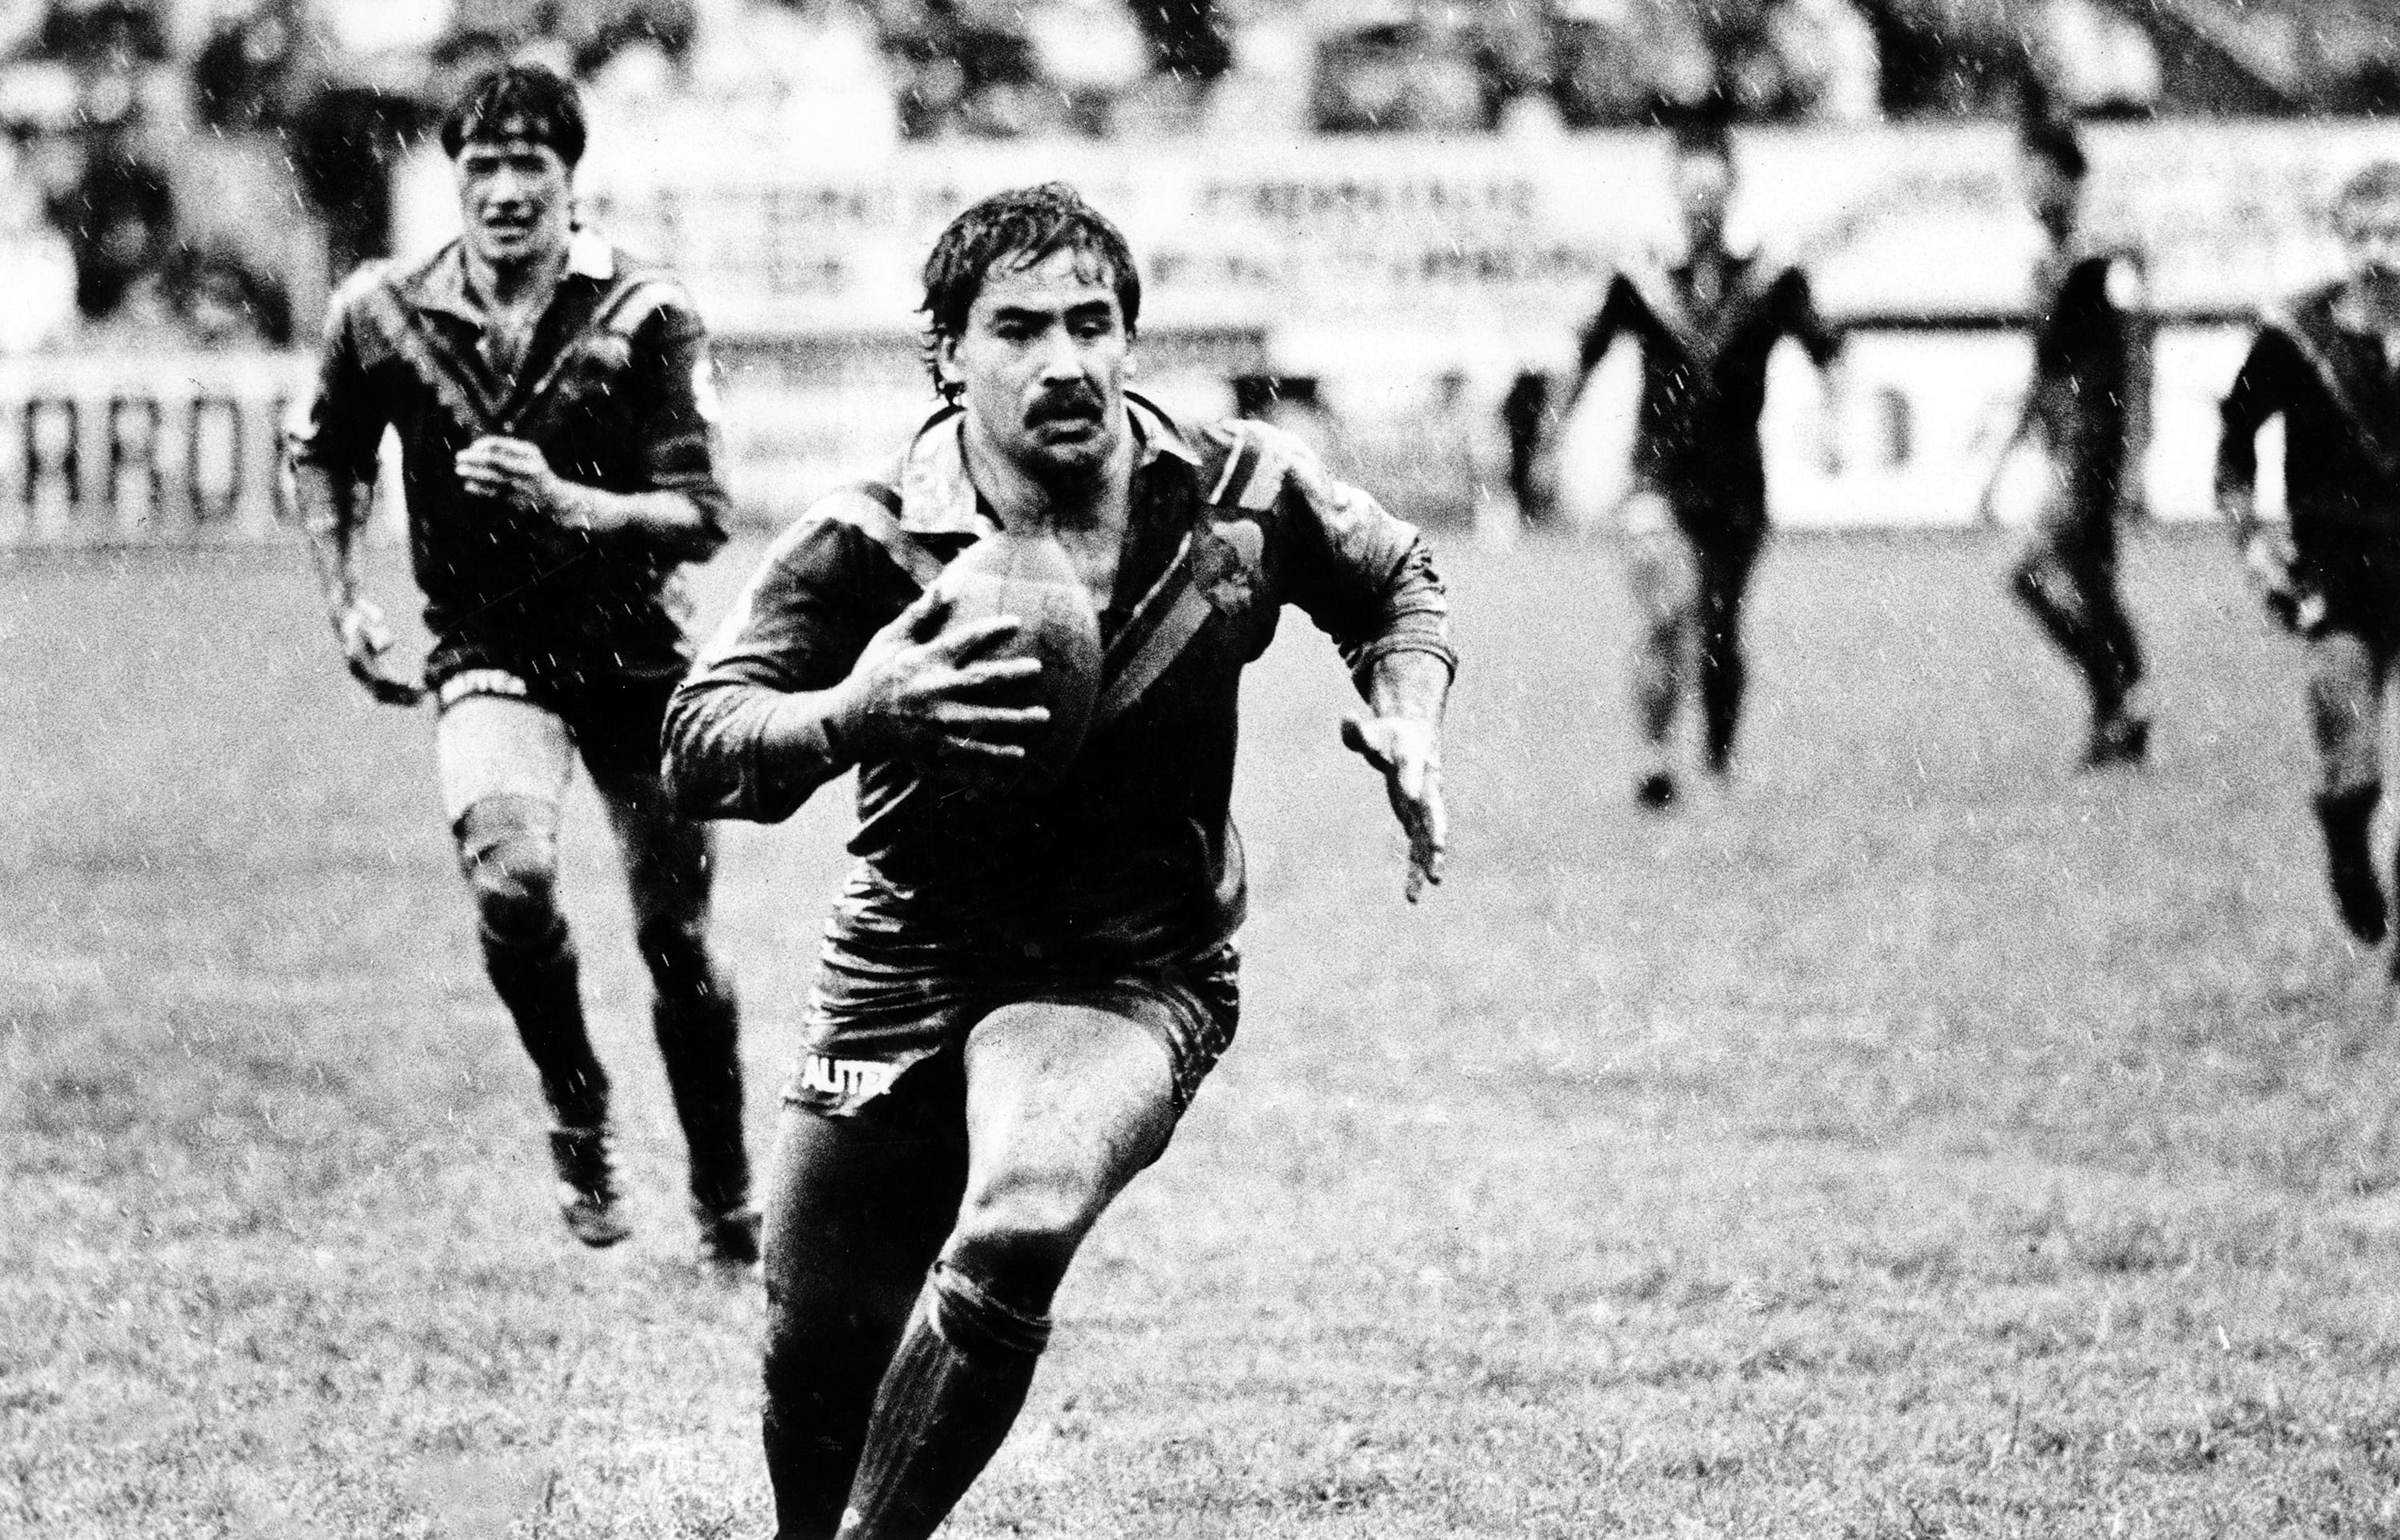 Kevin Tamati with the ball for the New Zealand Kiwis, playing at Carlaw park. Circa 1985